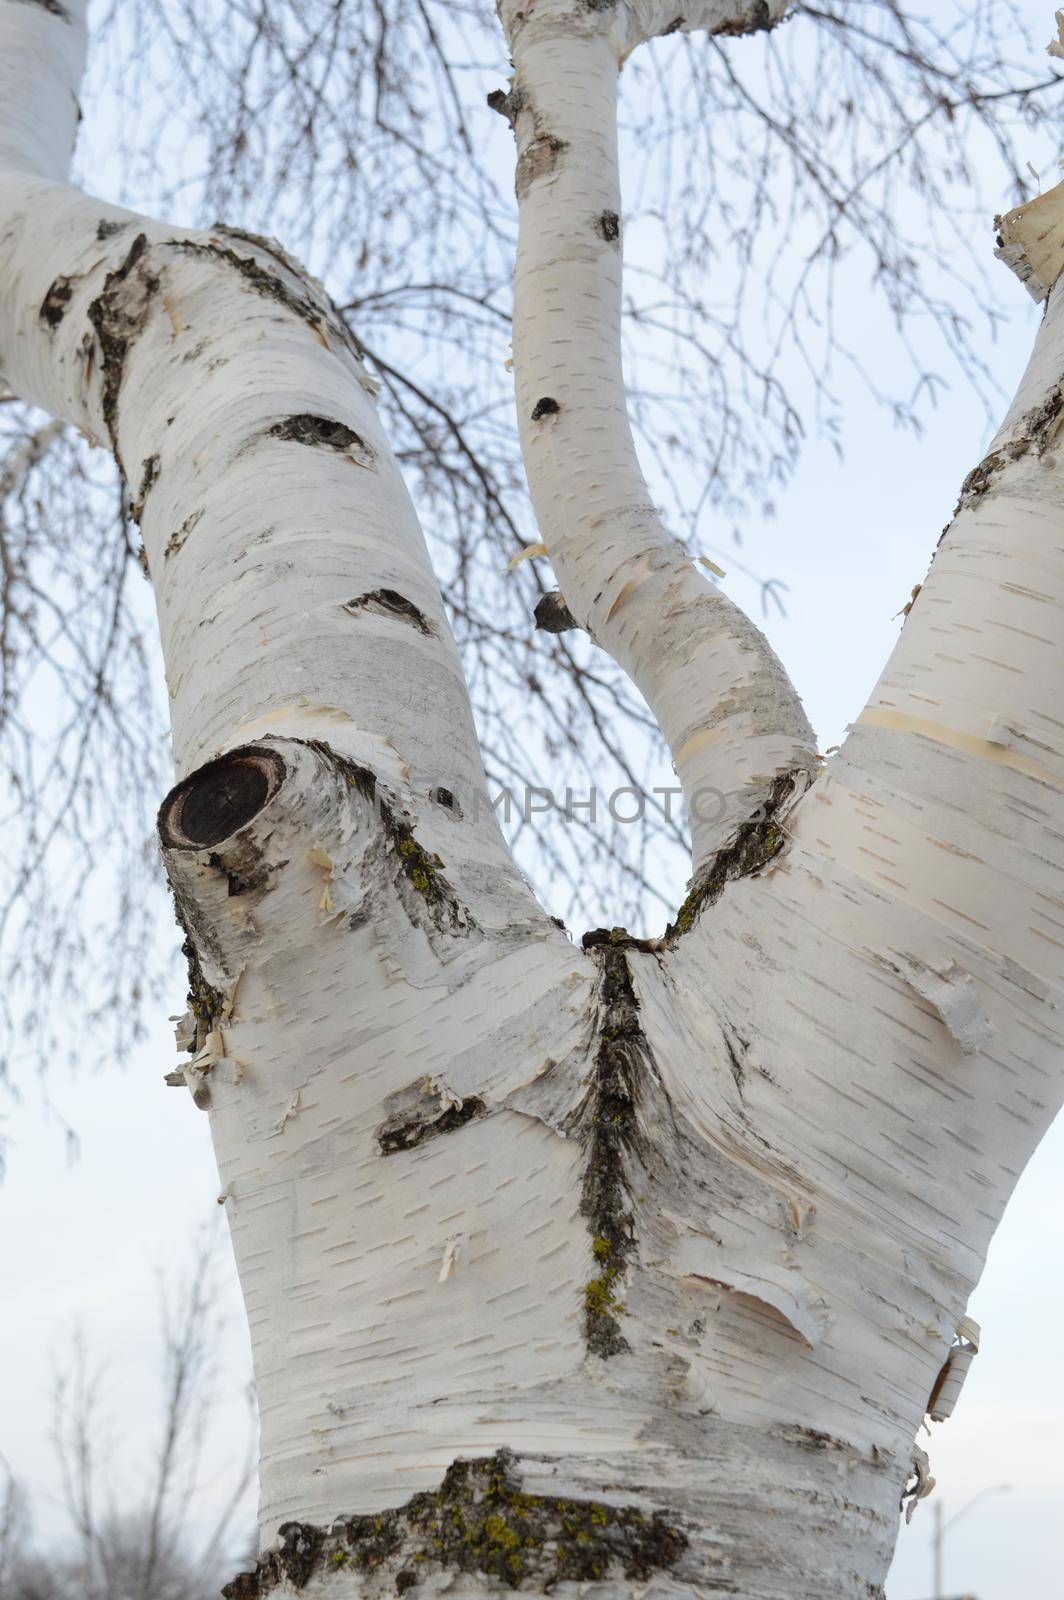 A white birch tree showing its detailed branches.